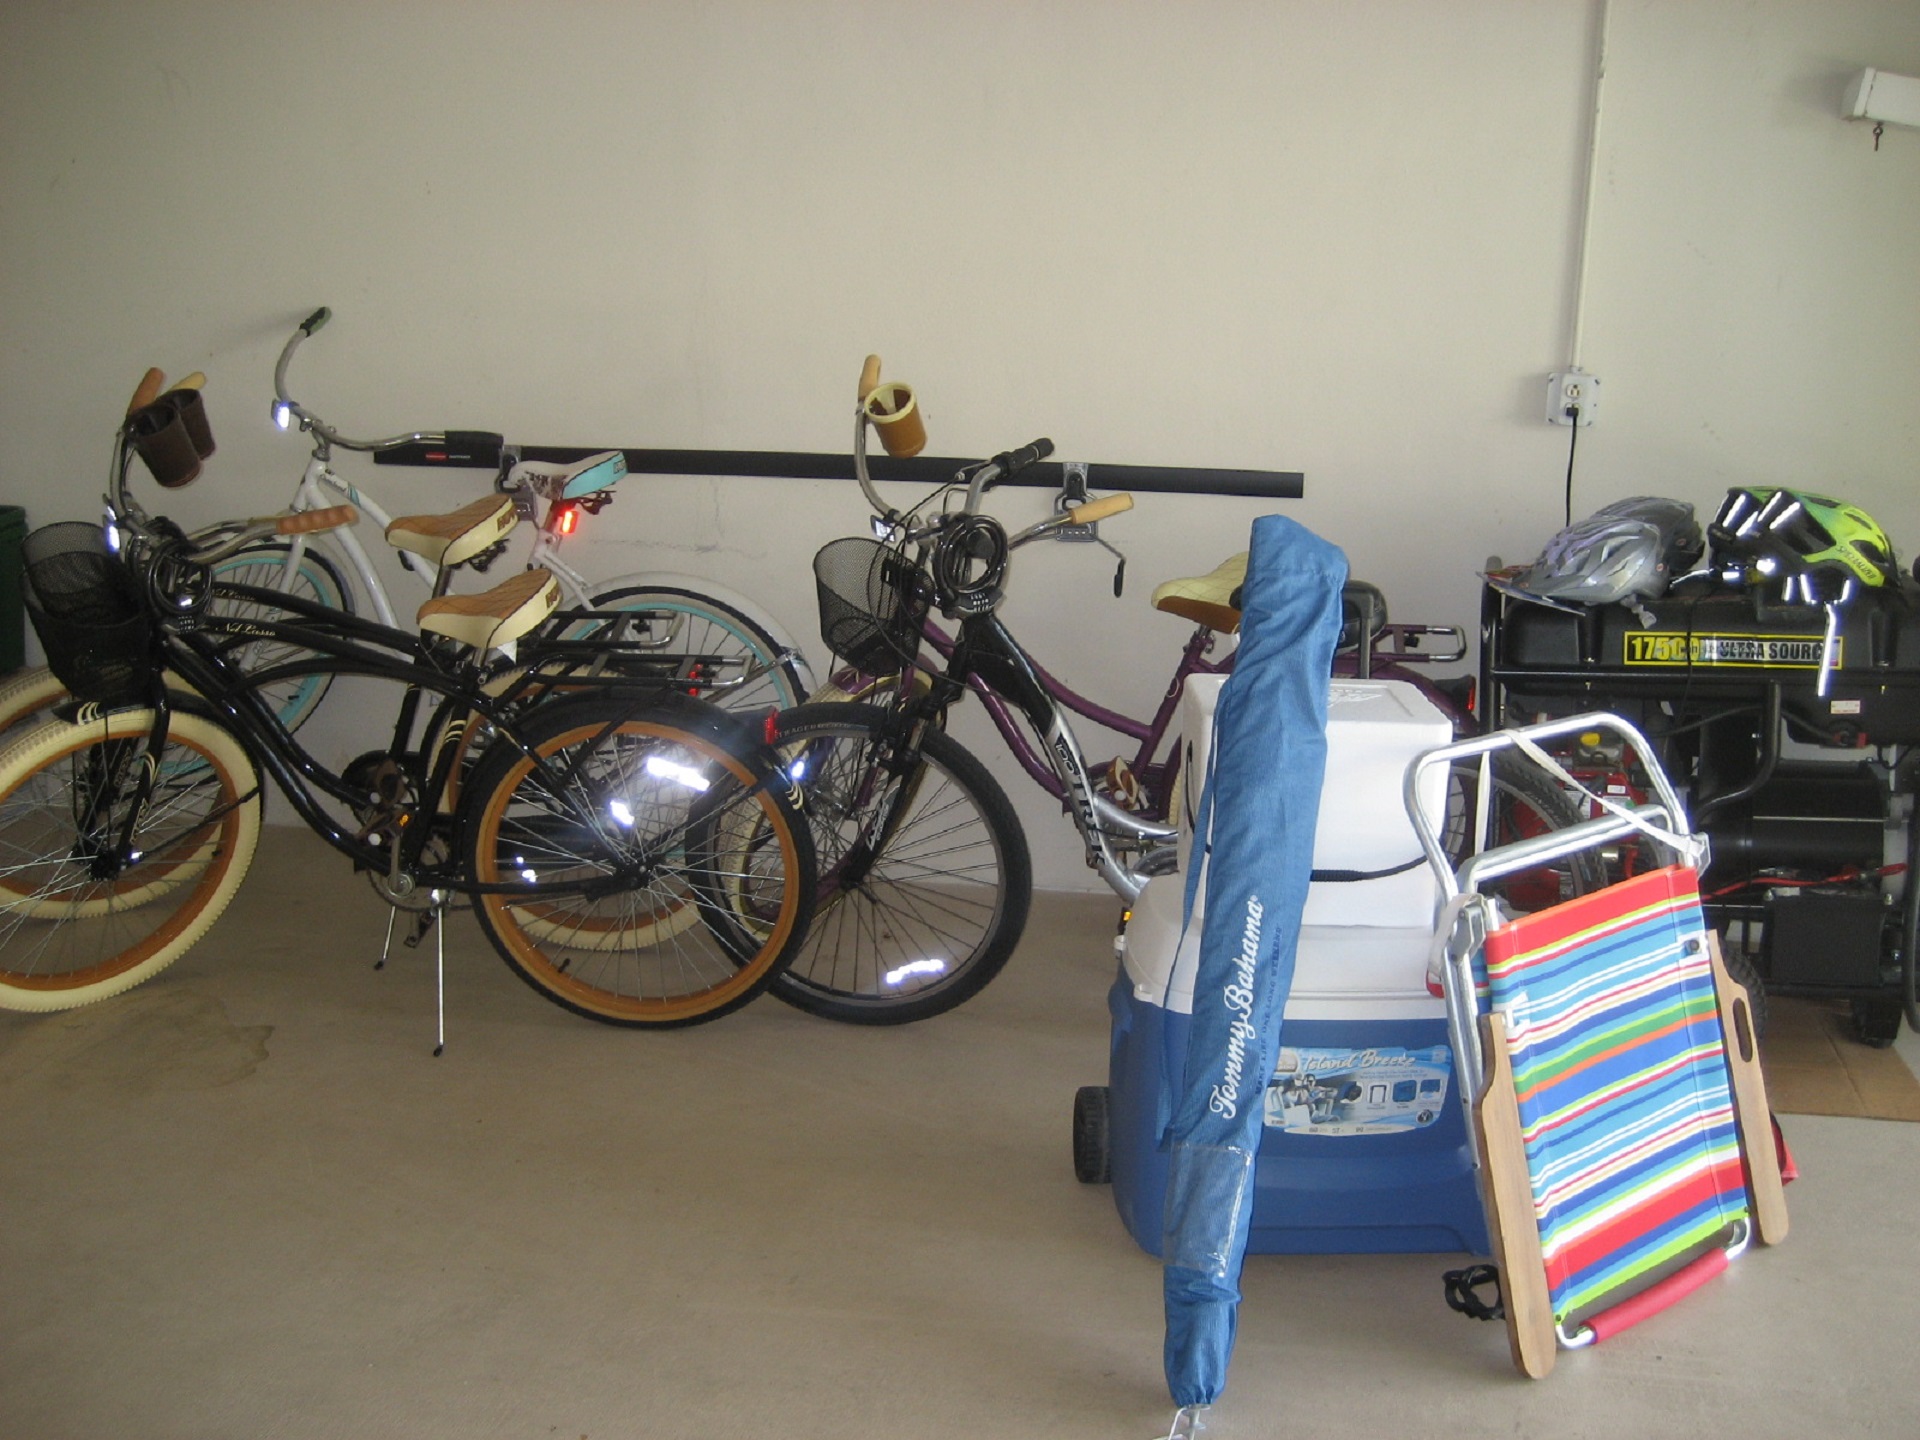 Bicycles, beach umbrellas, beach chairs, coolers and a cart are here at this Naples luxury vacaation beach  rental